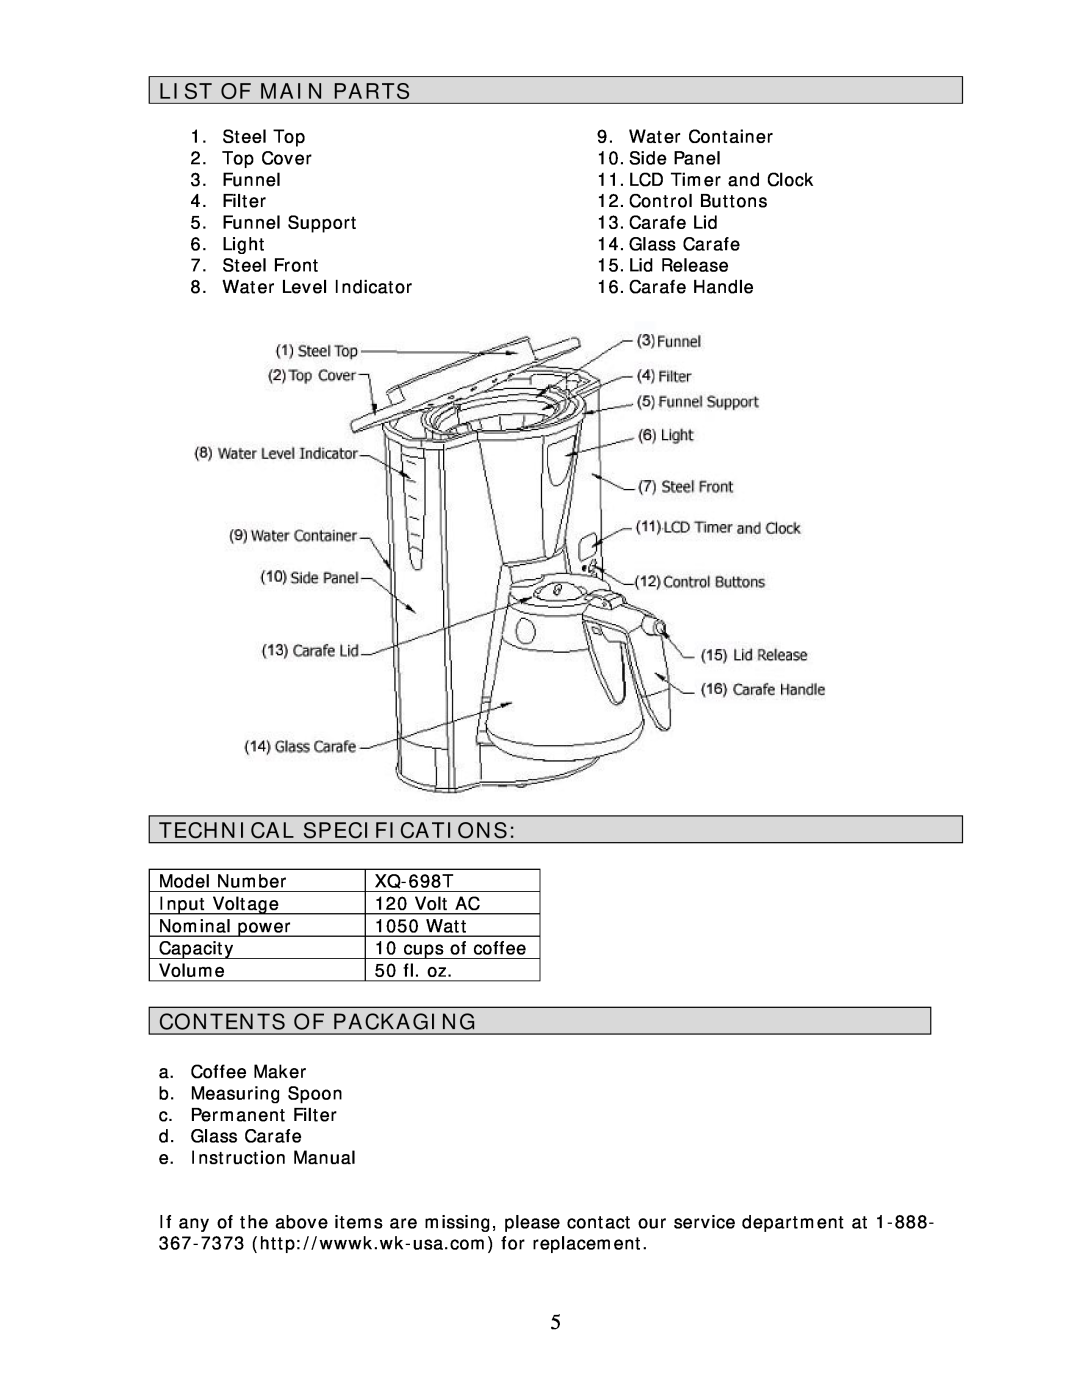 Wachsmuth & Krogmann XQ-698T manual List Of Main Parts, Technical Specifications, Contents Of Packaging 